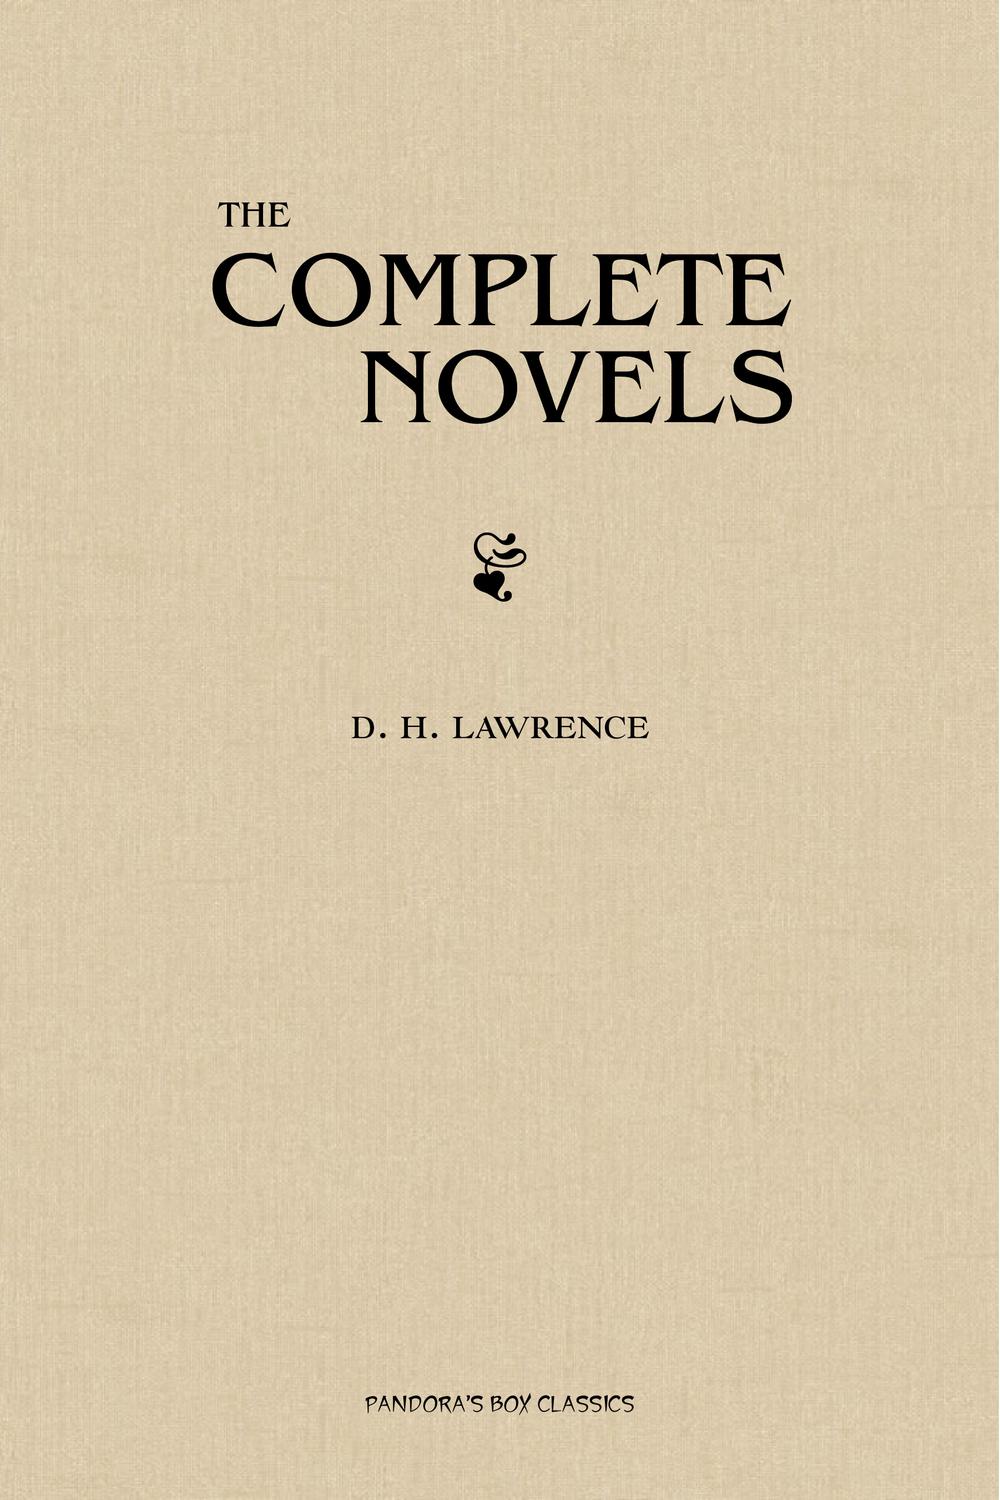 The Complete Novels of D. H. Lawrence - D. H. Lawrence